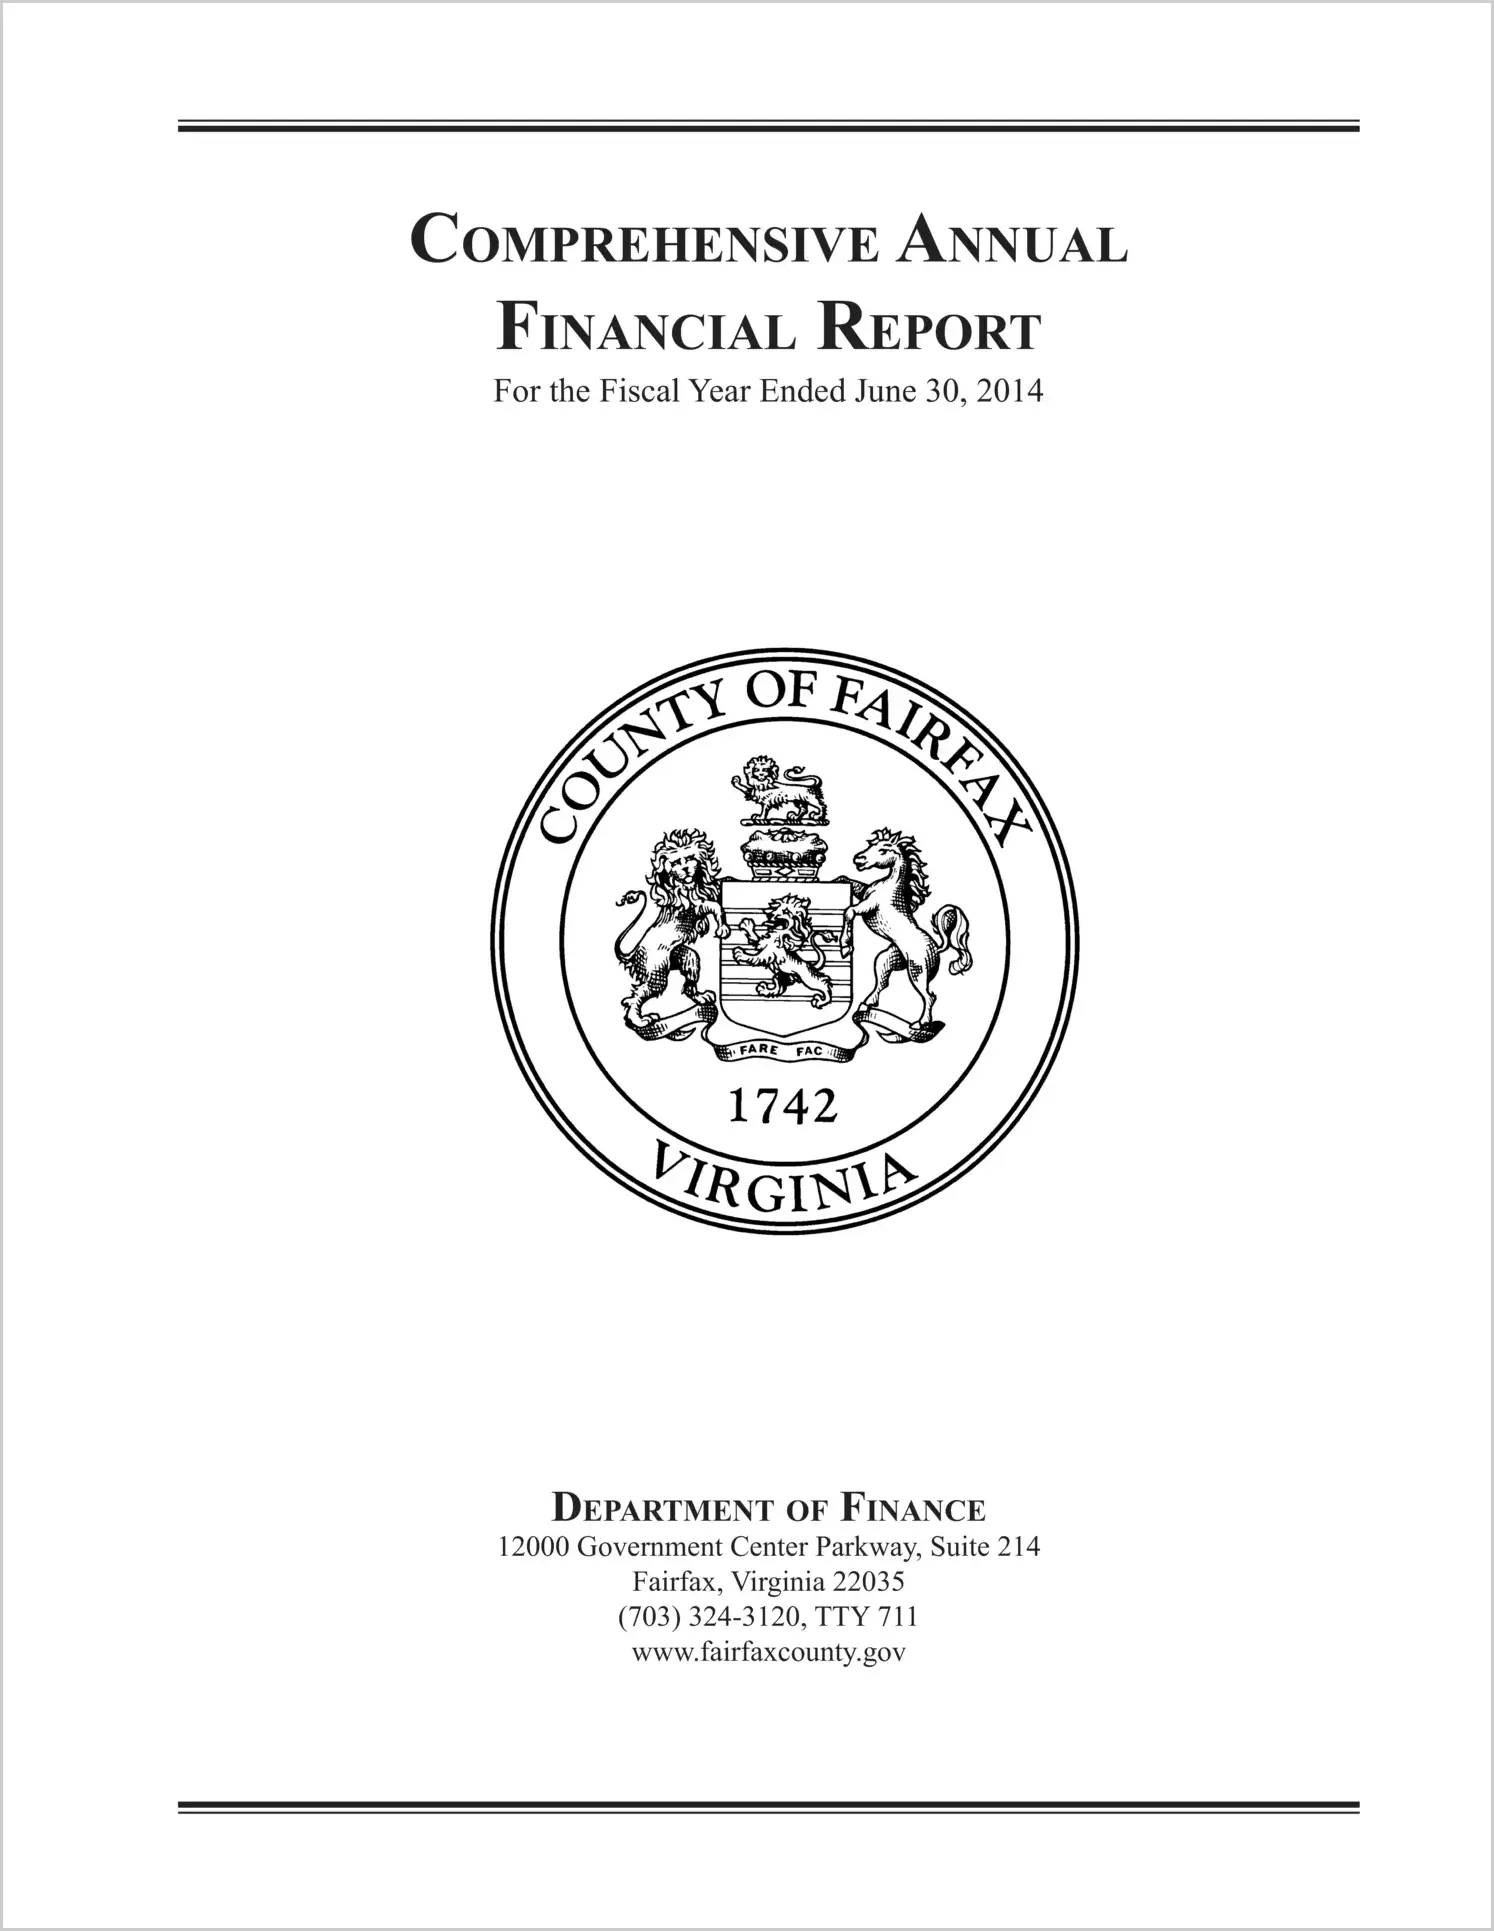 2014 Annual Financial Report for County of Fairfax